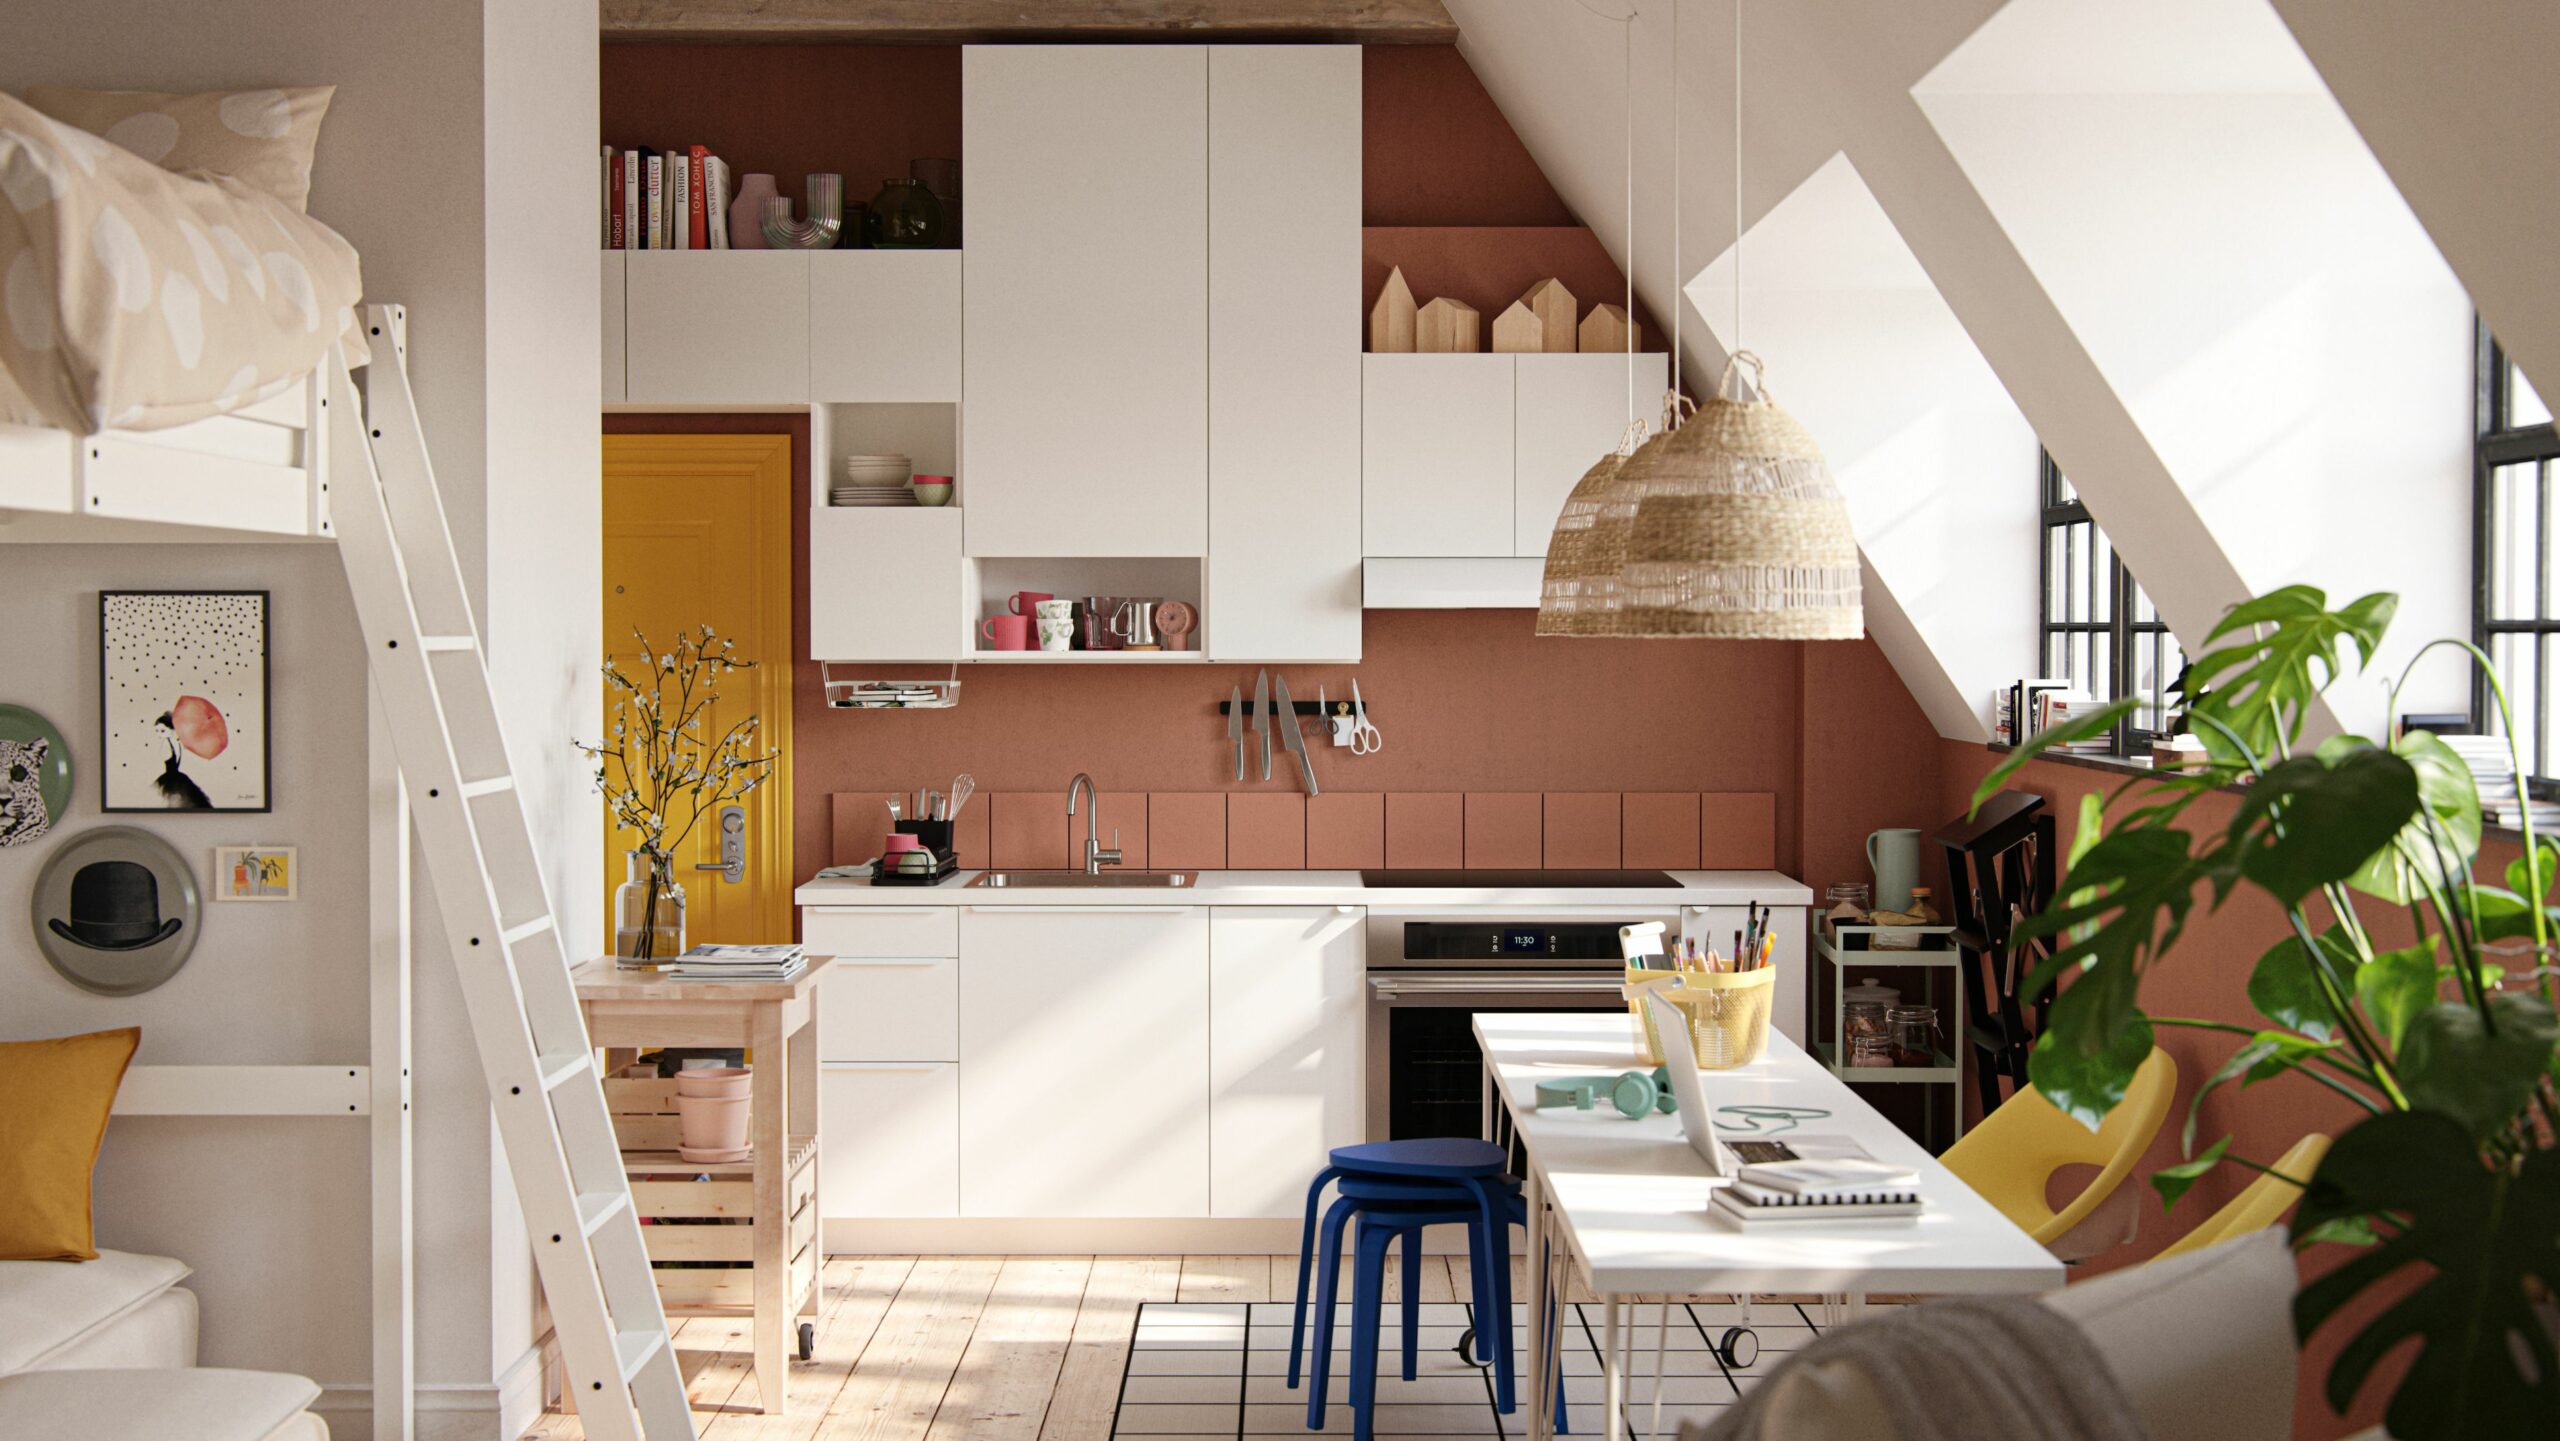 A gallery of kitchen inspiration - IKEA CA